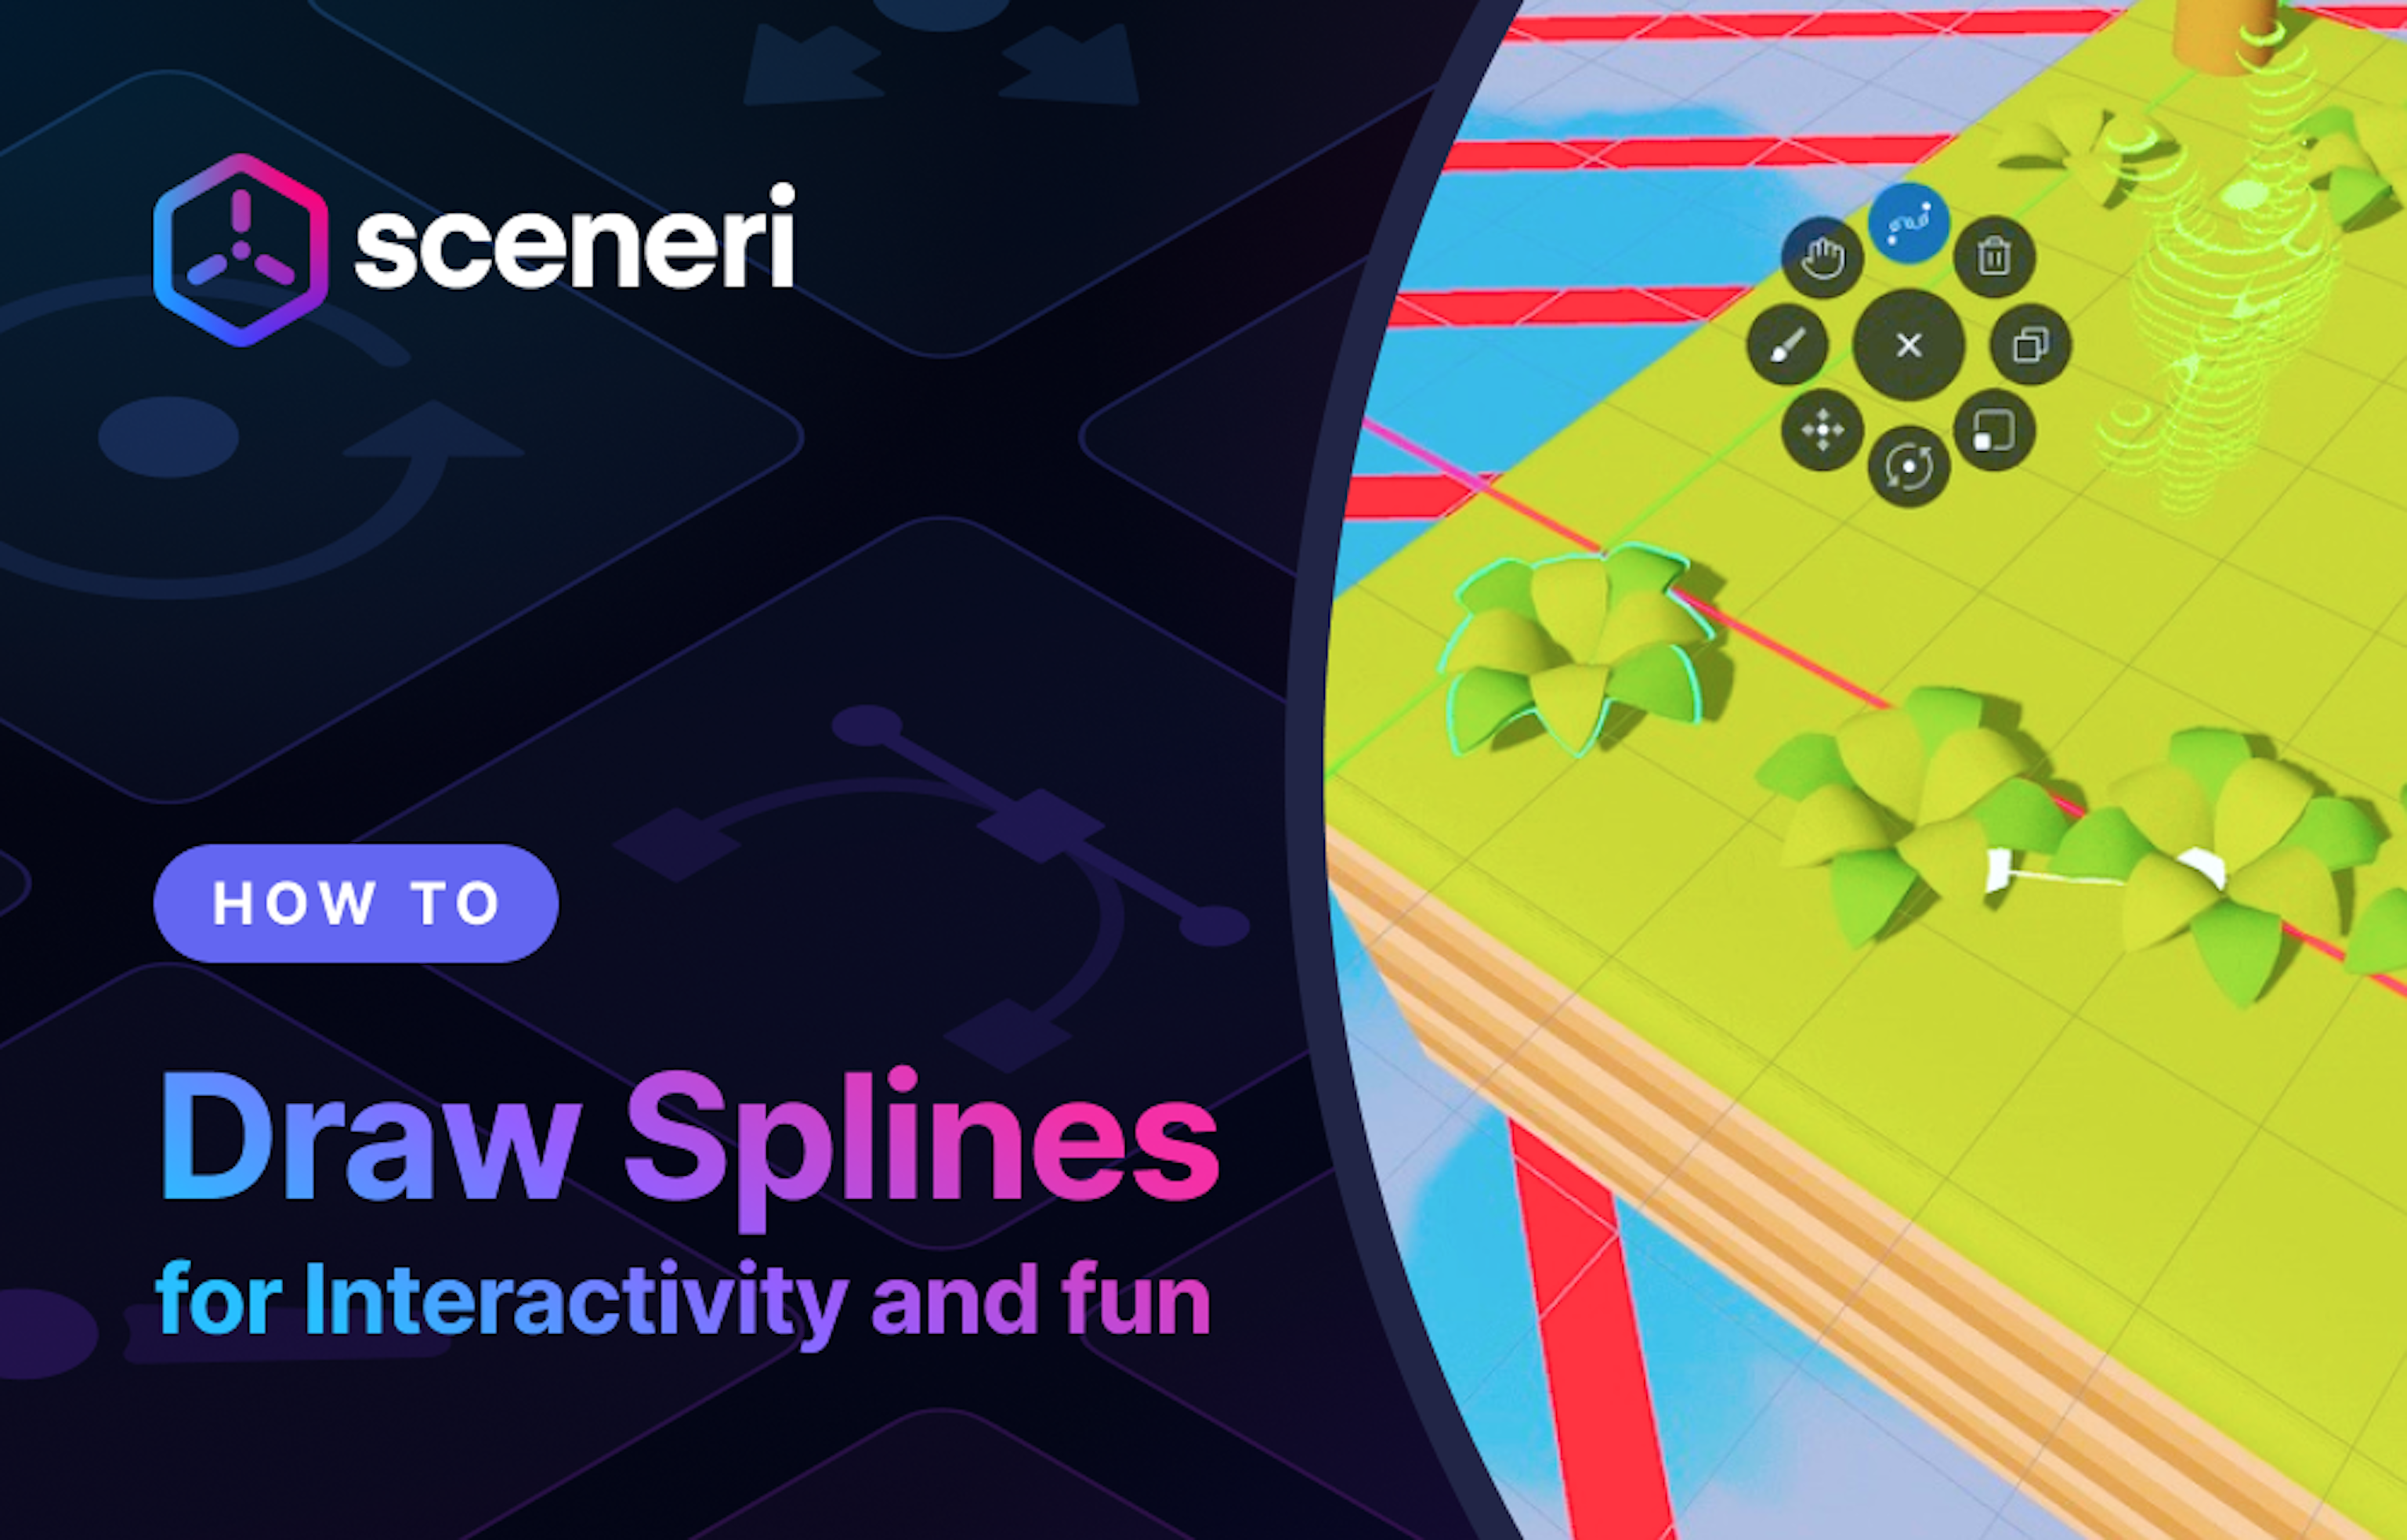 How to - Add Interactivity with the Spline Tool